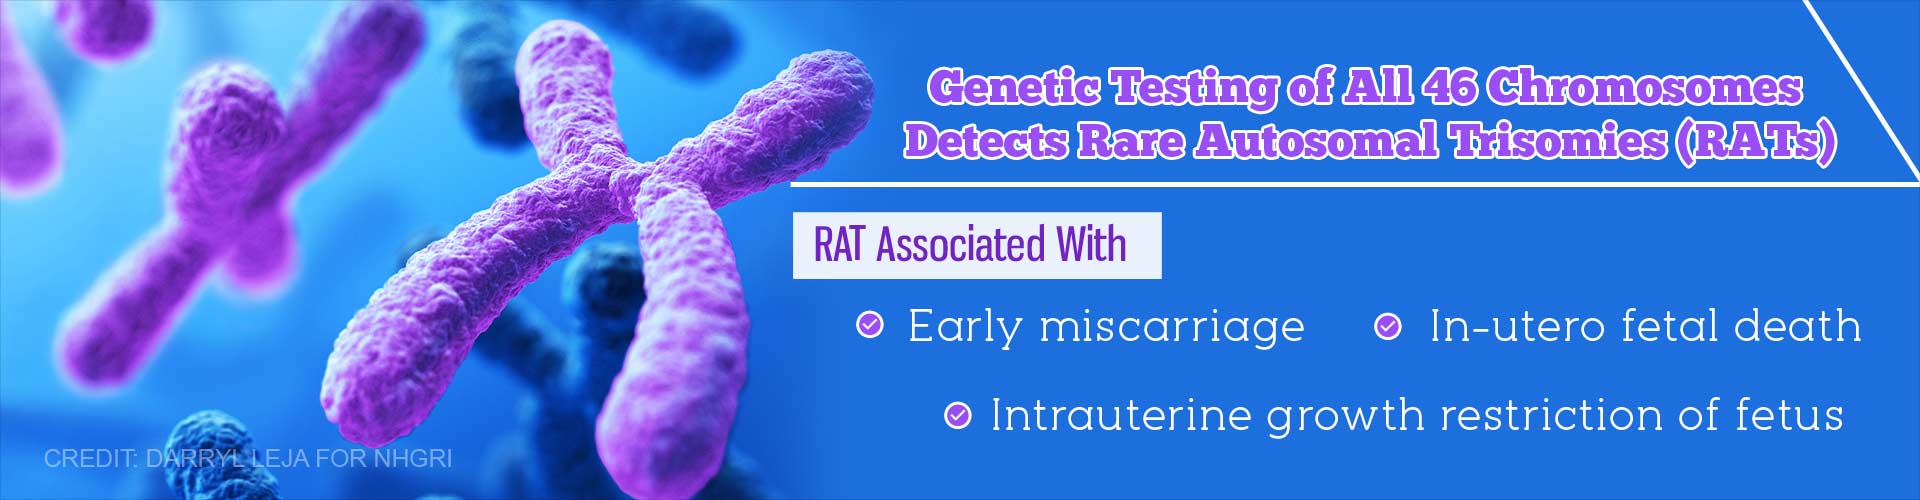 Genetic testing of all 46 chromosomse detects rare autosomal trisomies (RATs)
RAT associated with
- early miscarriage
- in-utero fetal death
- intrauterine growth restriction of fetus